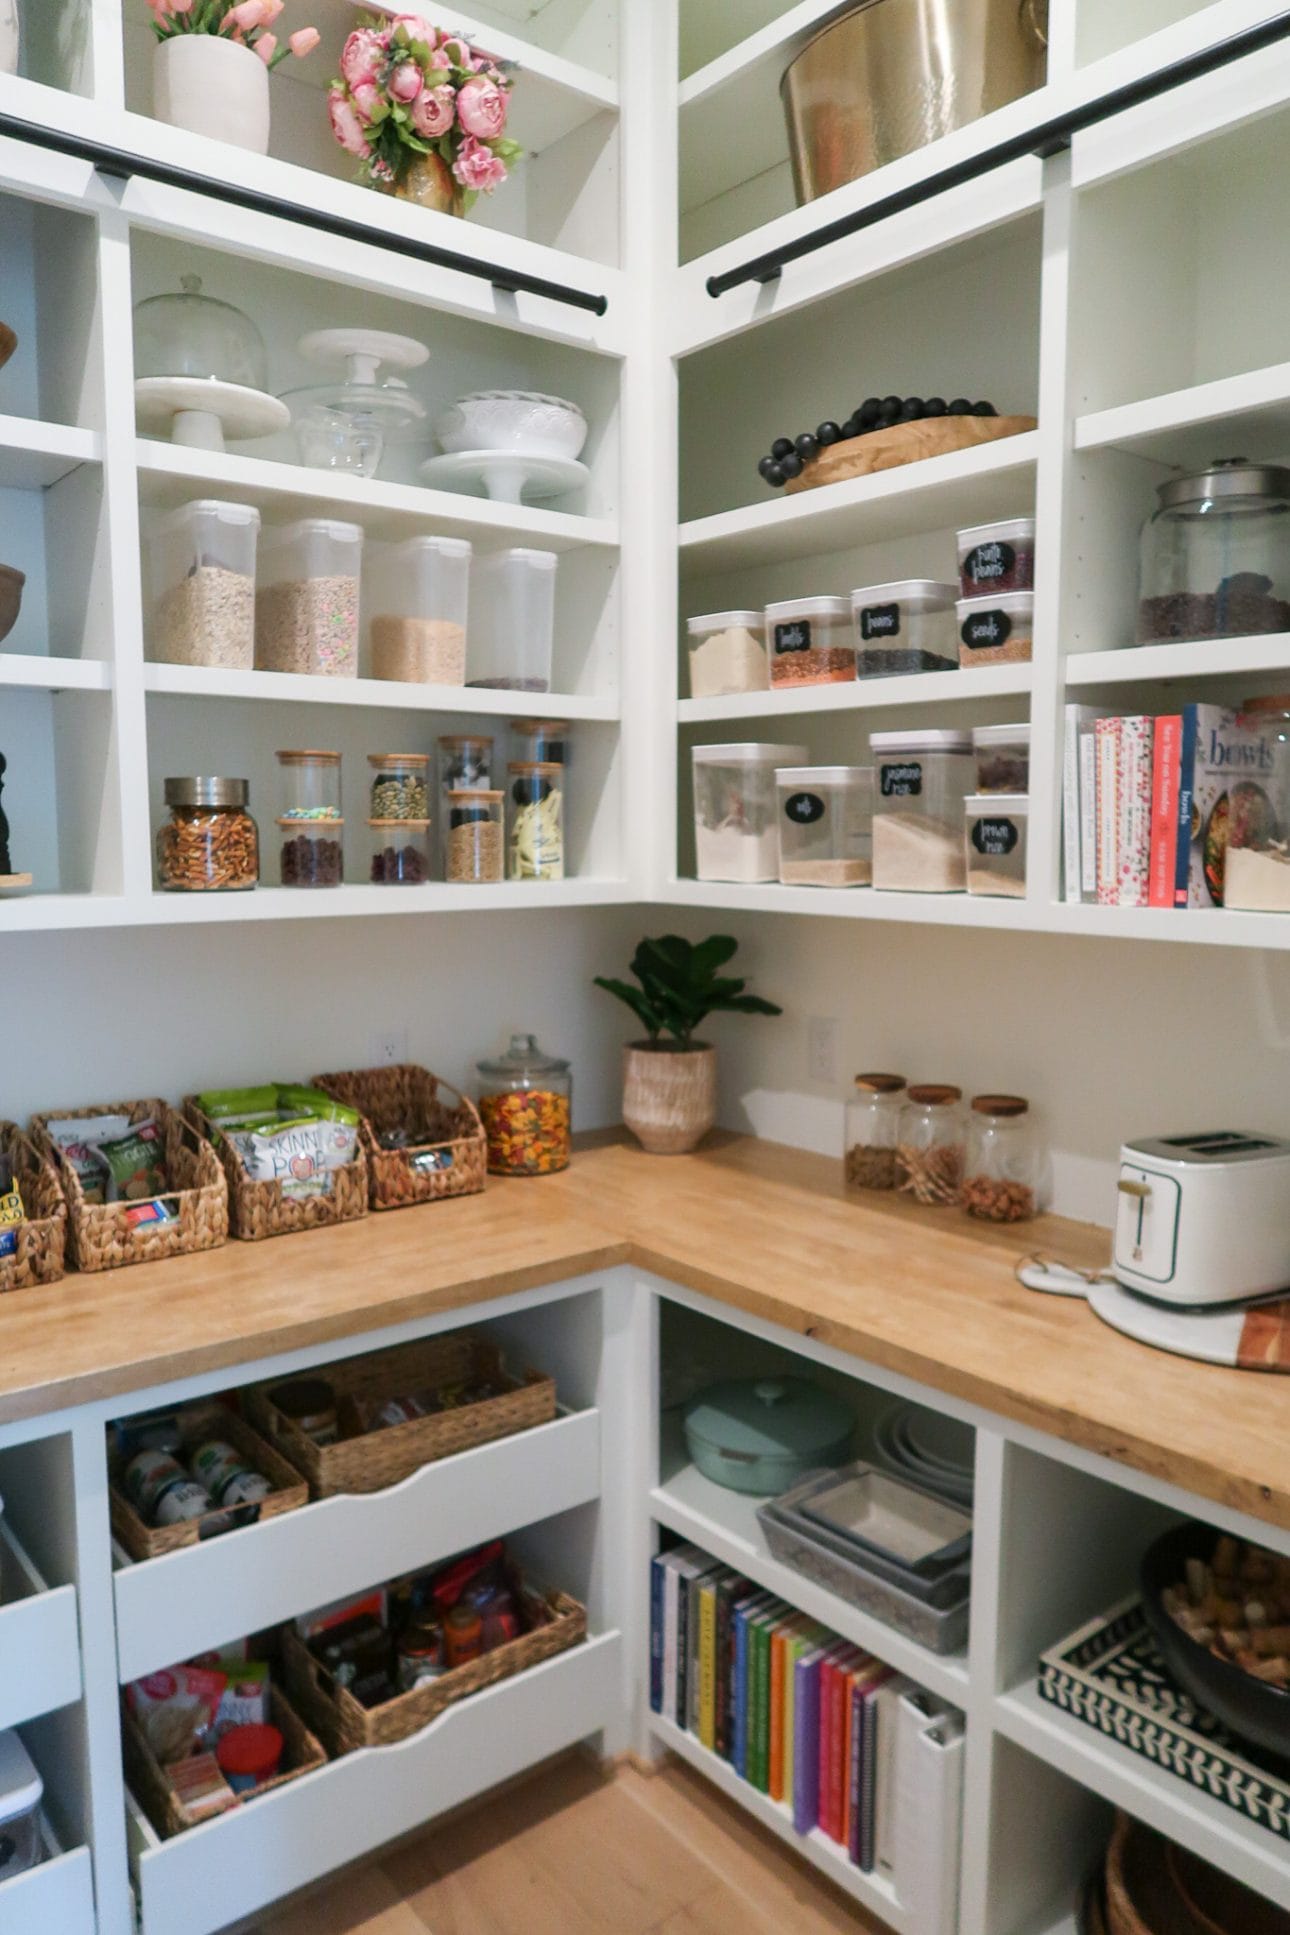 9 Pantry Goods Home Cooks Will Love in 2022